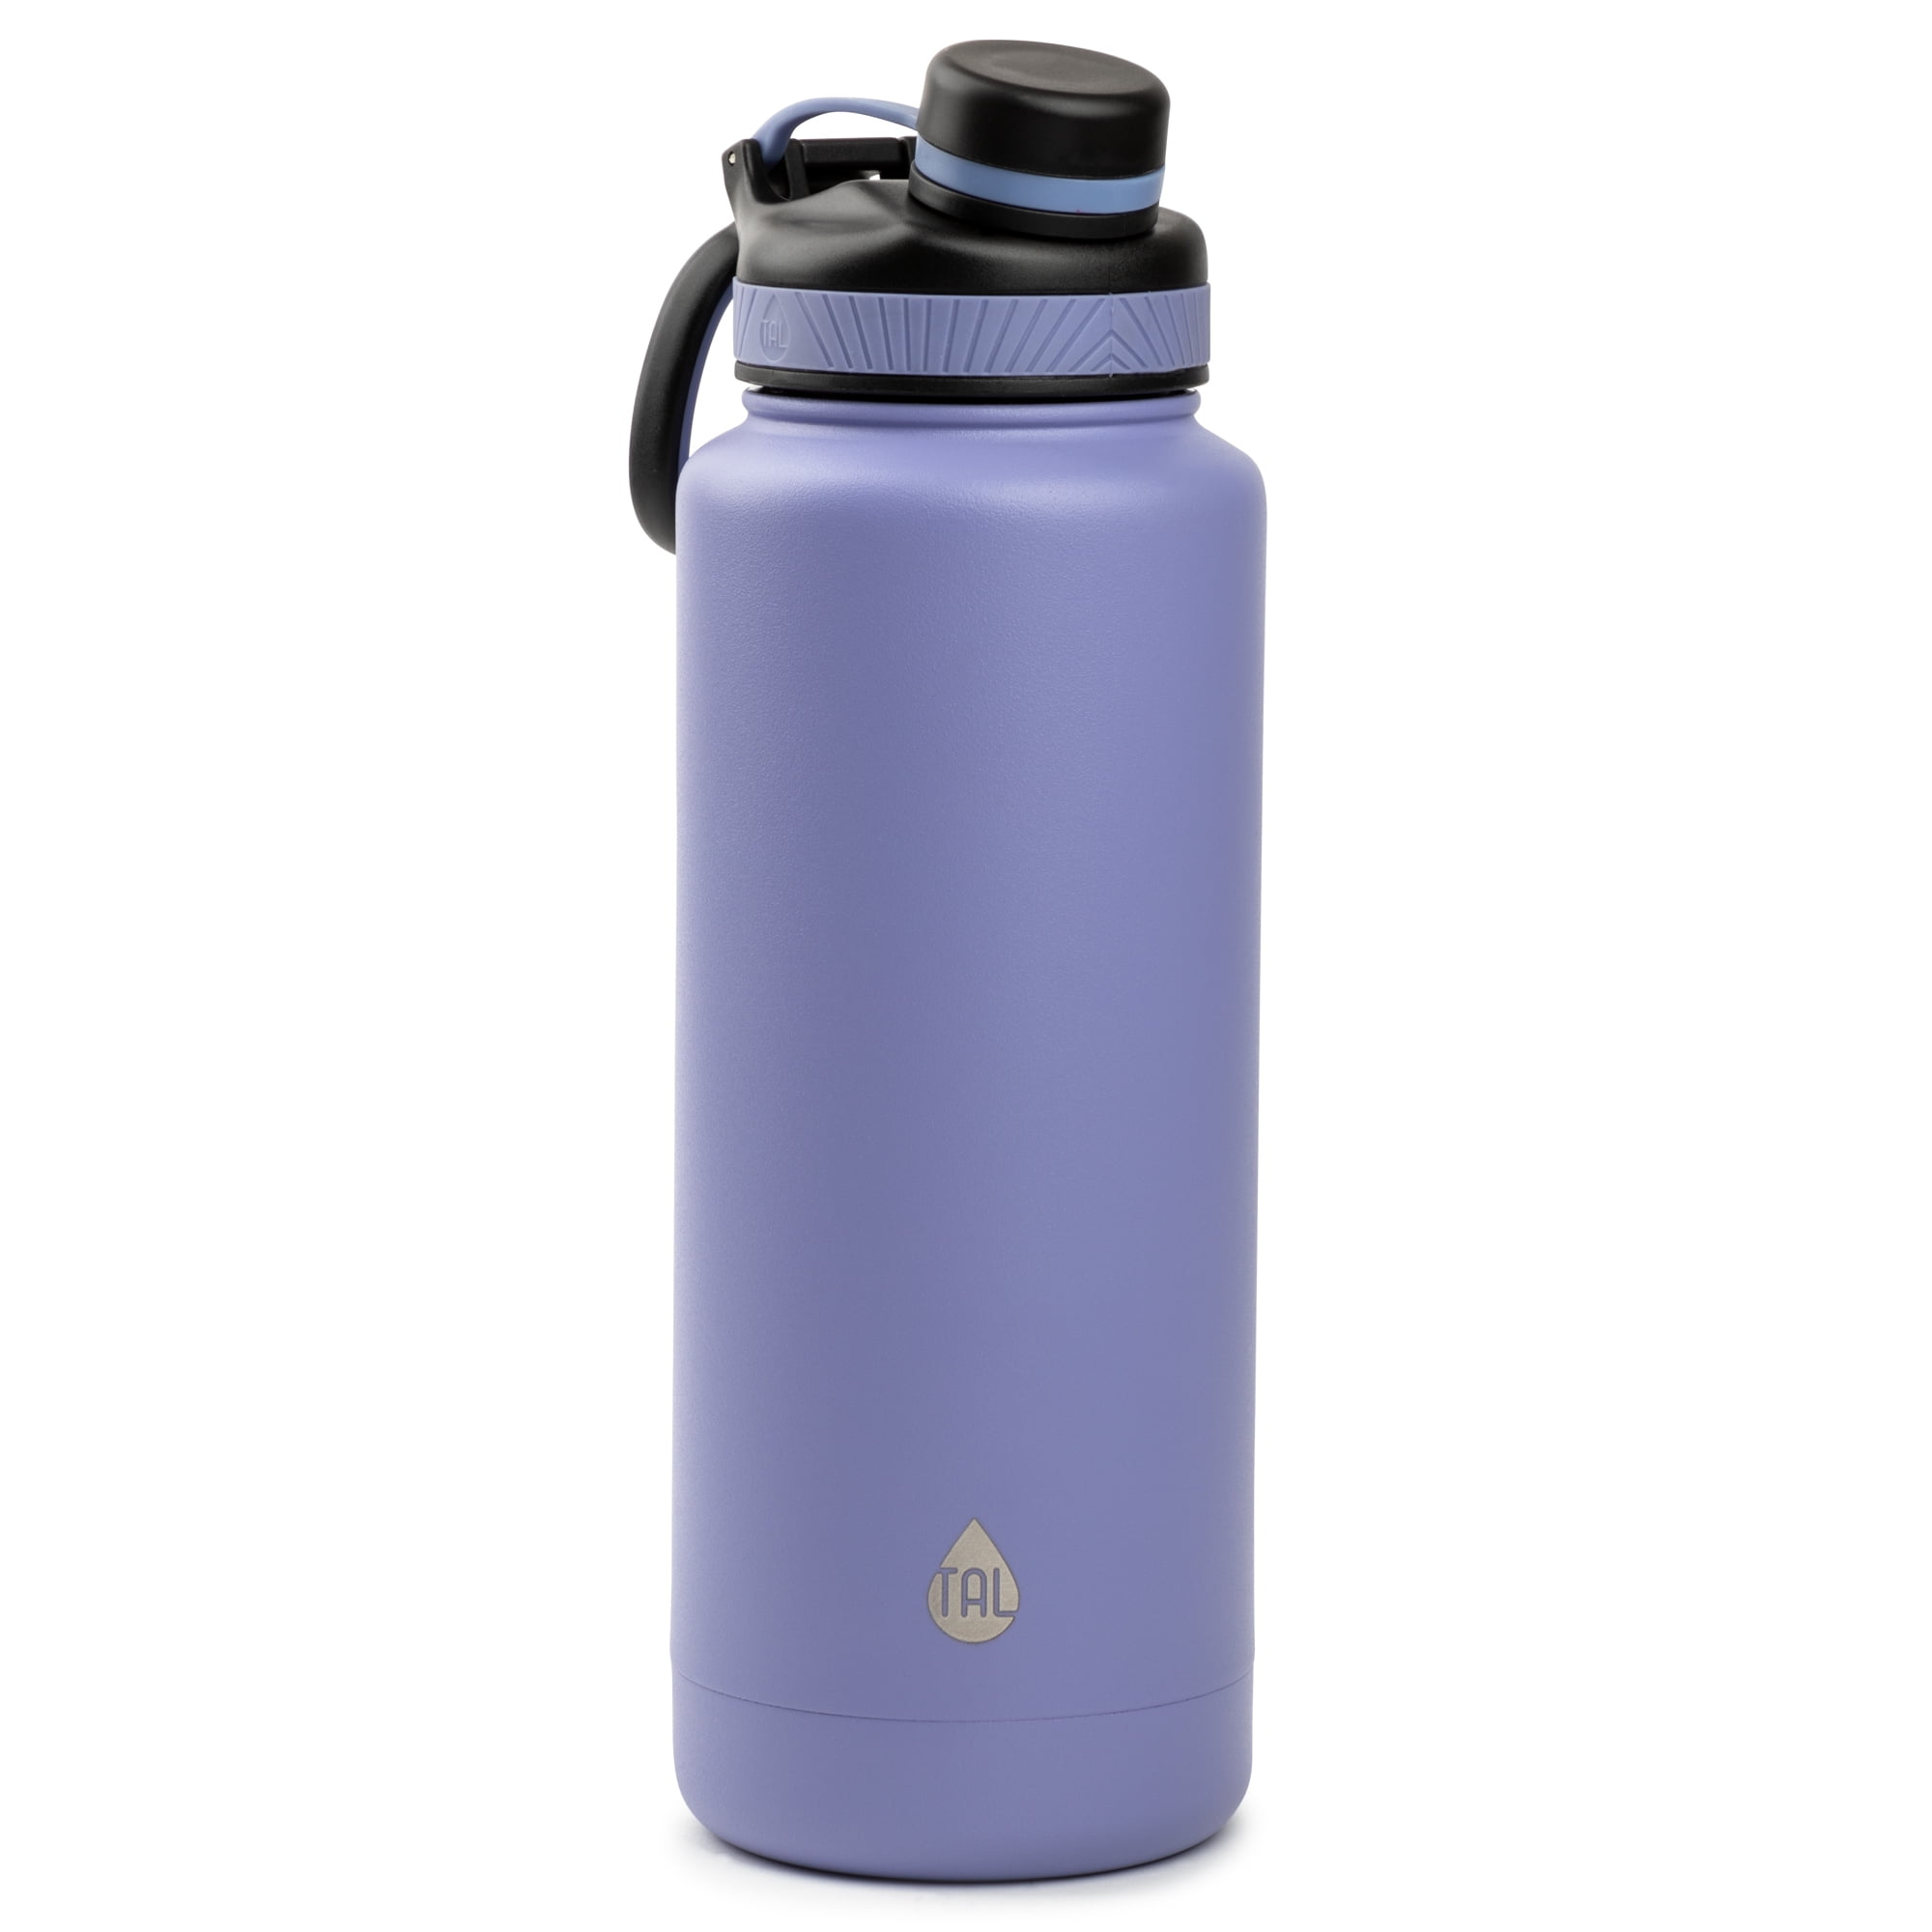 Purple Flower Lavender Kids Water Bottle Thermos with Straw School Vacuum Insulated Stainless Steel Thermos Bottle Cup Leakproof Sport Travel Cup Mug Handle for Girls Women Biking 20 OZ 